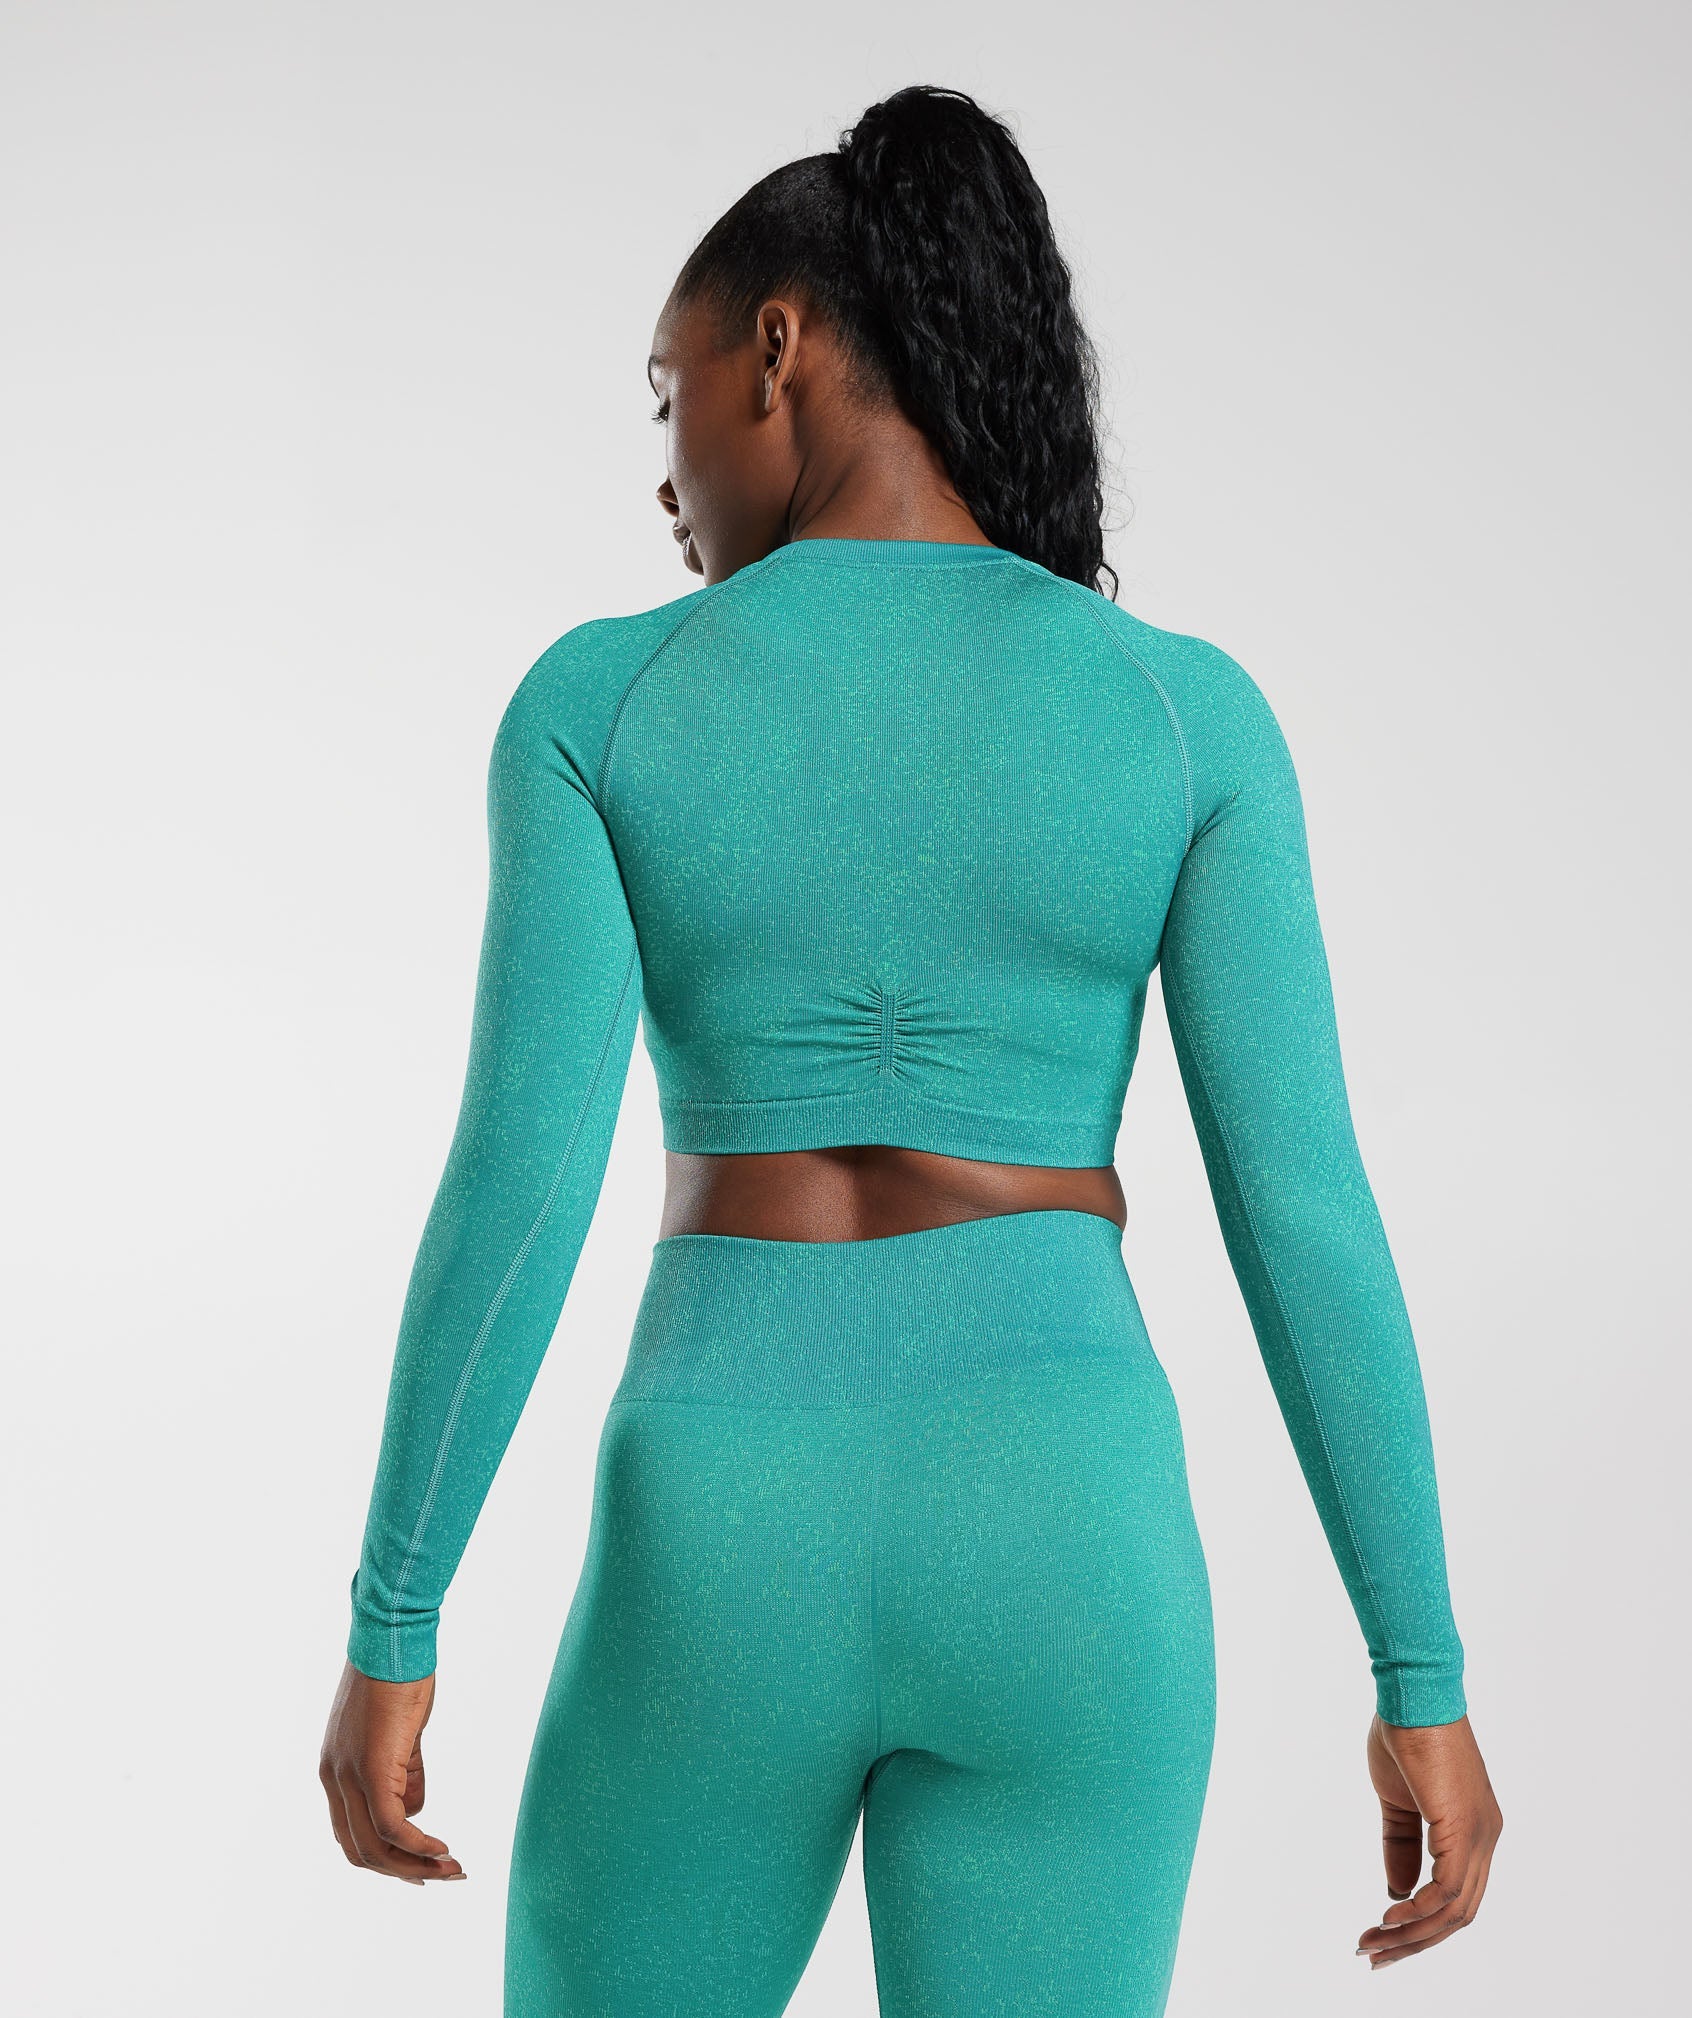 Seamless Gym Wear  Seamless Clothing From Gymshark